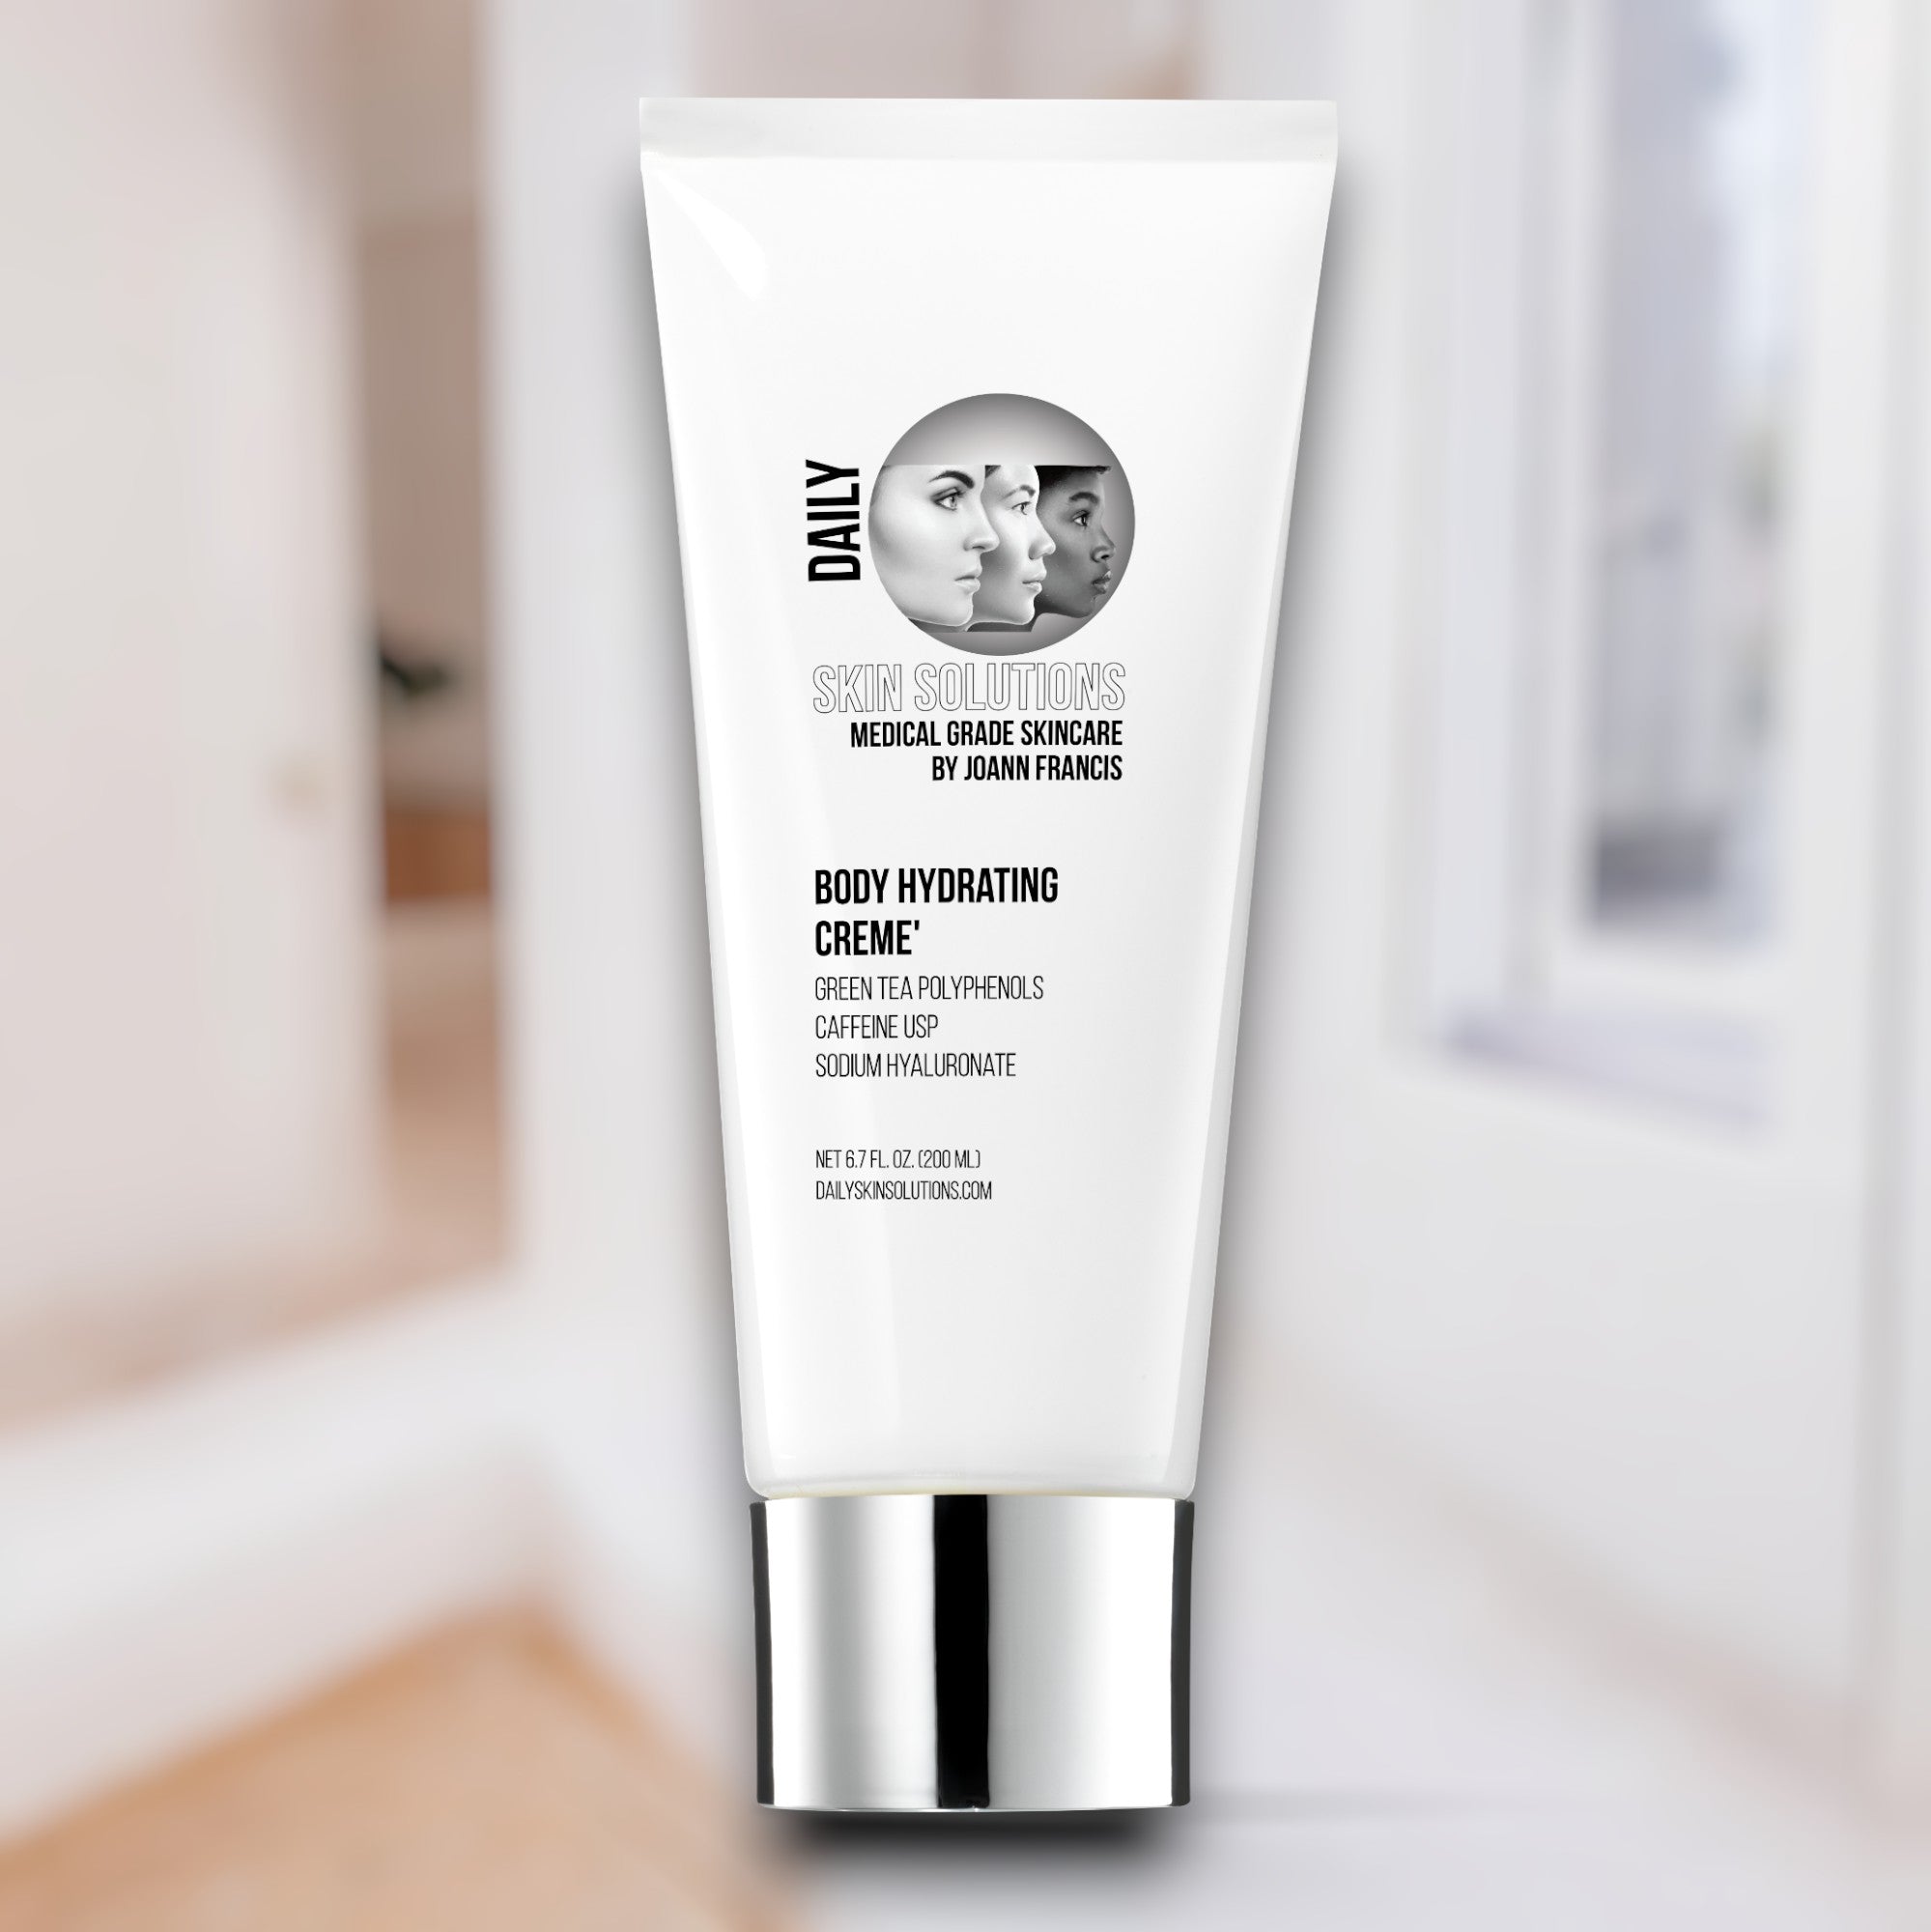 Body Hydrating Creme by Daily Skin Solutions